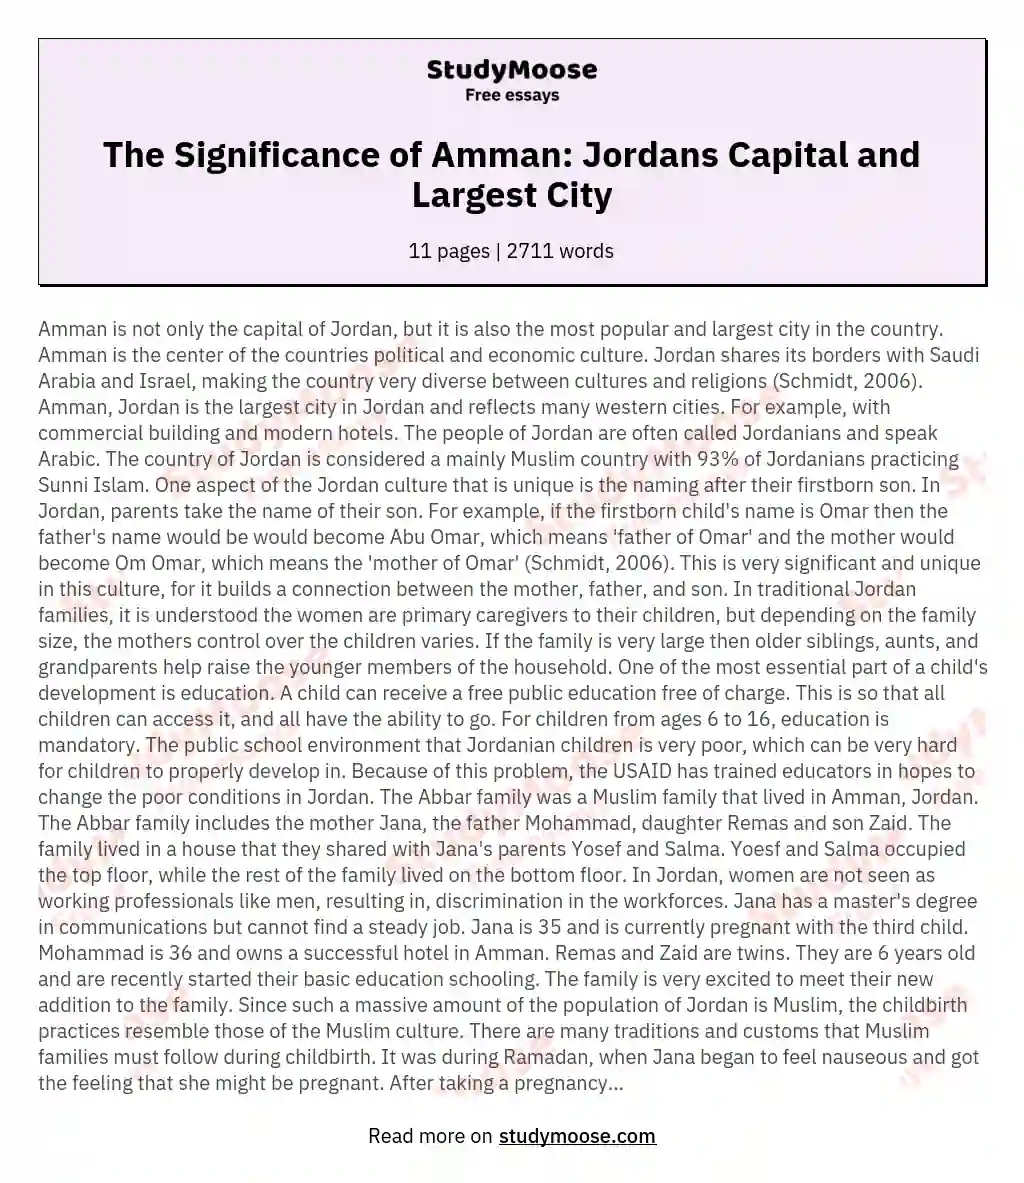 The Significance of Amman: Jordans Capital and Largest City essay